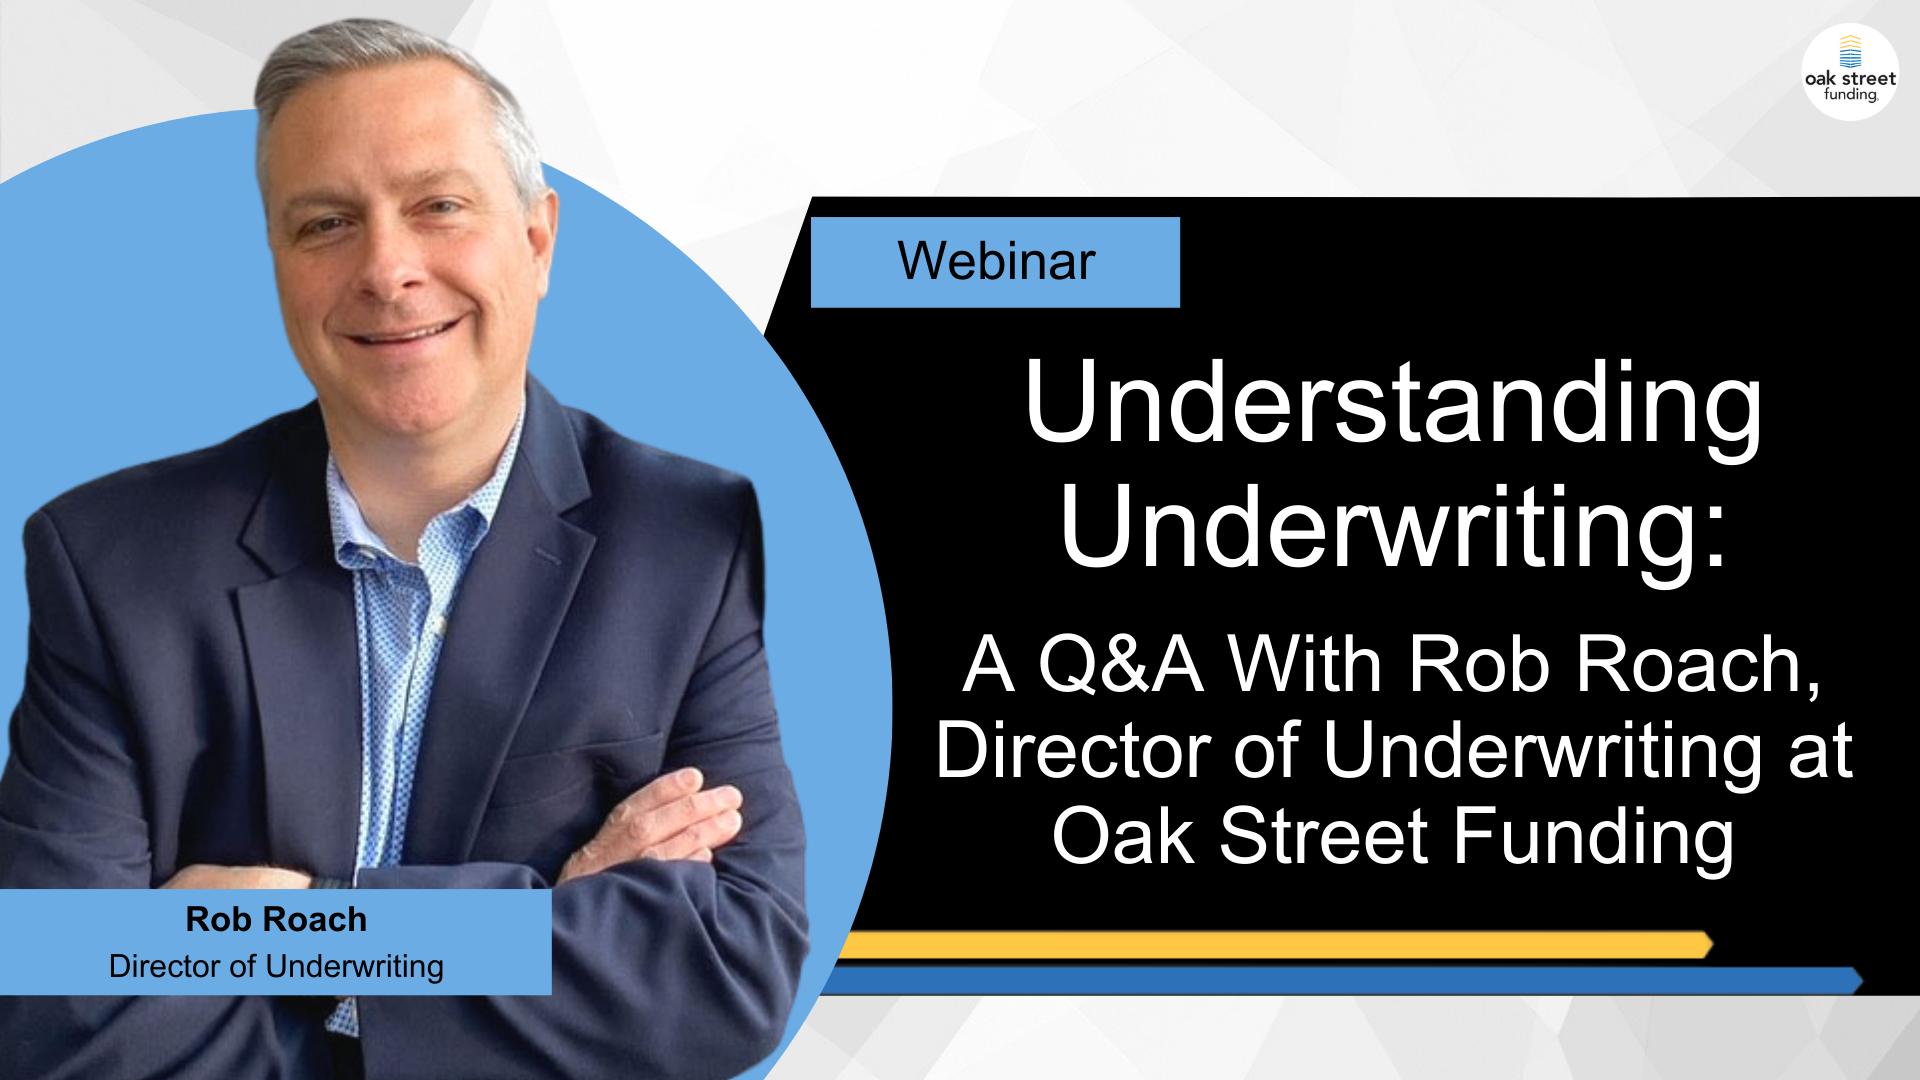 Understanding Underwriting: A Q&A With Rob Roach, Director of Underwriting at Oak Street Funding